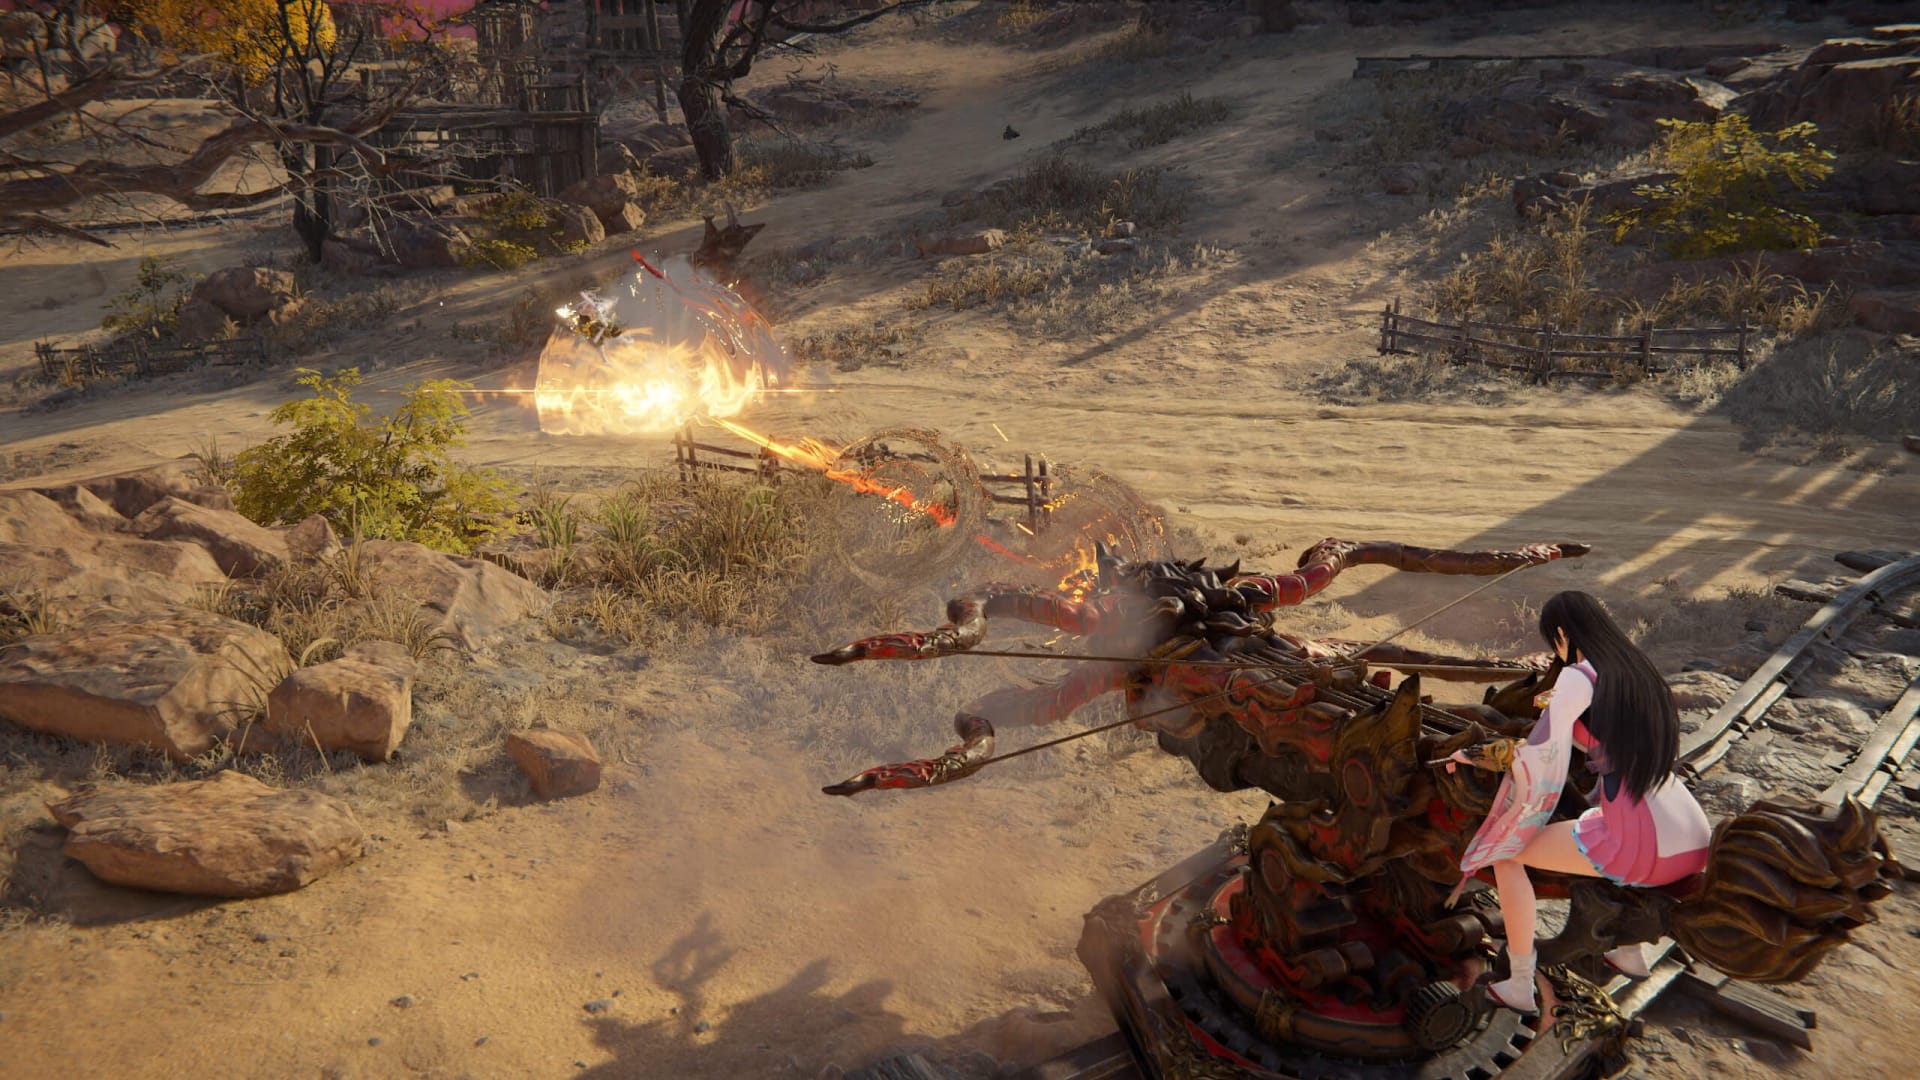 A player firing a crossbow turret in Naraka: Bladepoint